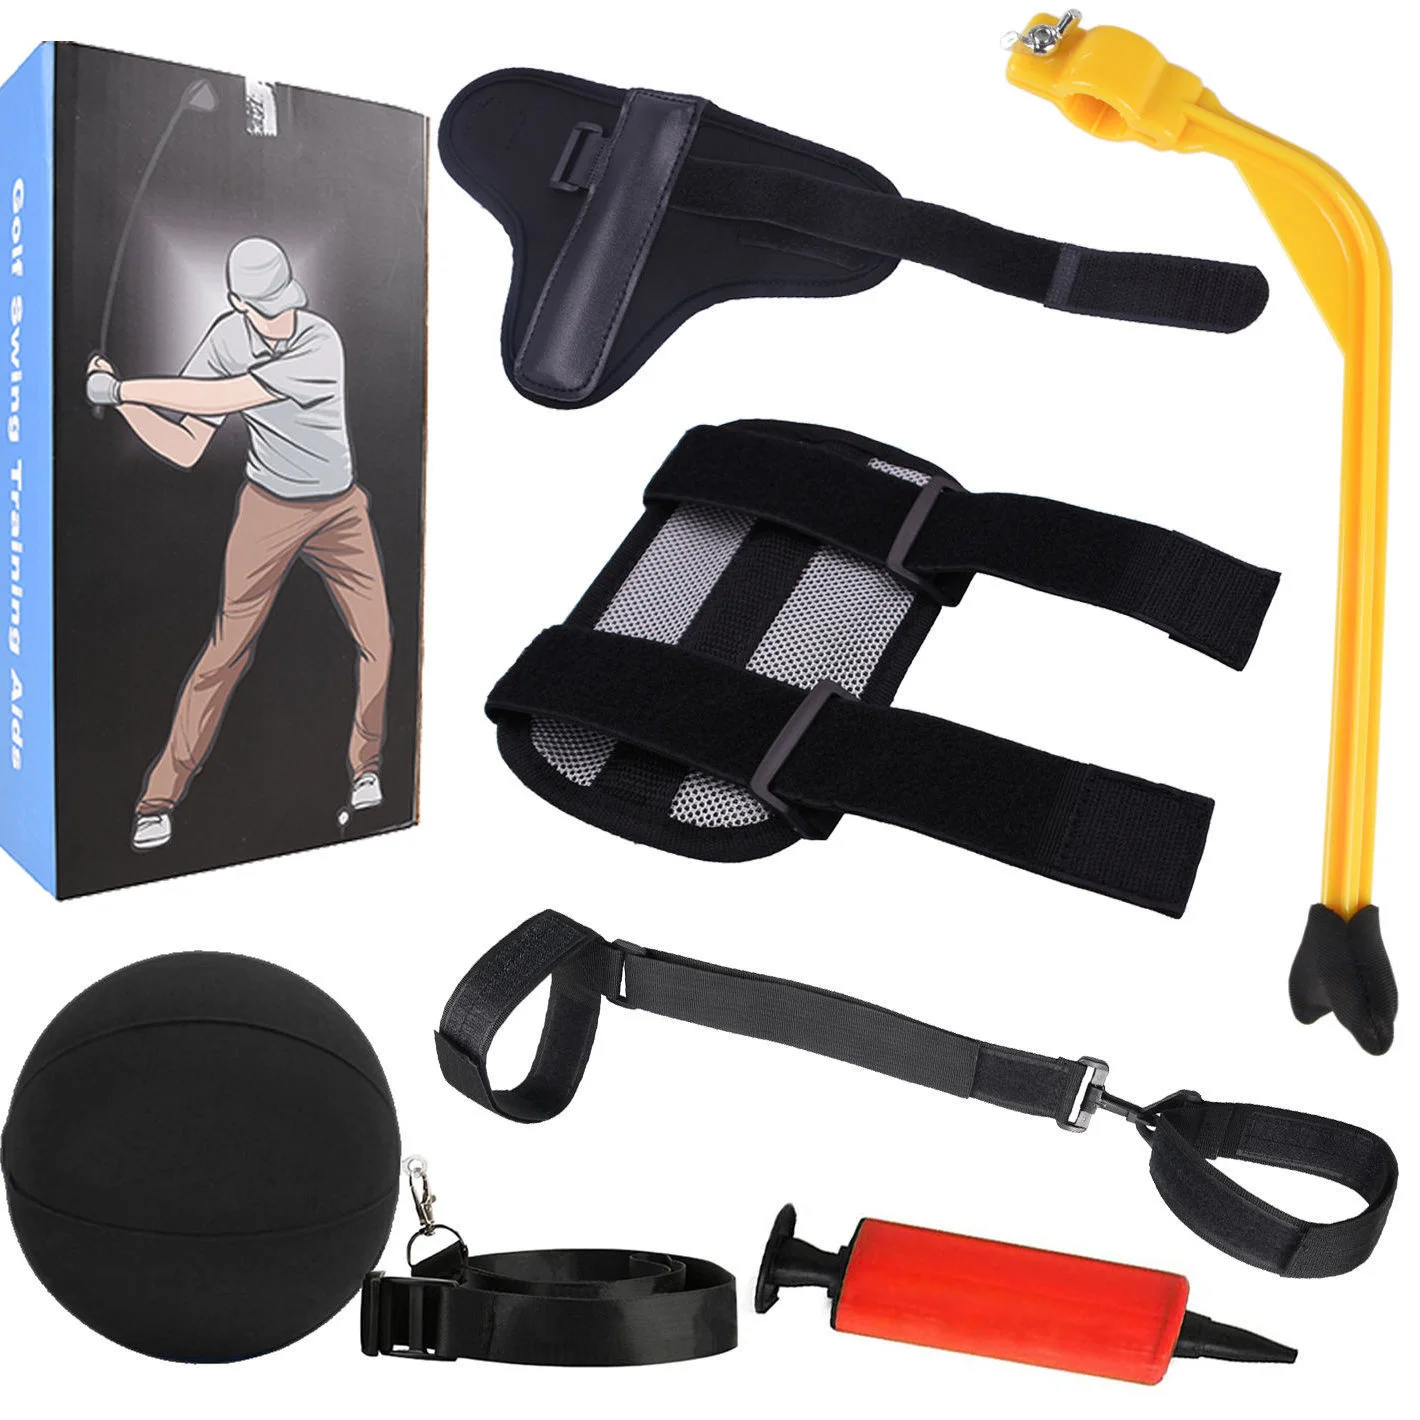 

5 Pc/Set High Quality Golf Swing Training Aids Club Arm Band Trainer Impact Ball Inflator Posture Correction Beginner Practice